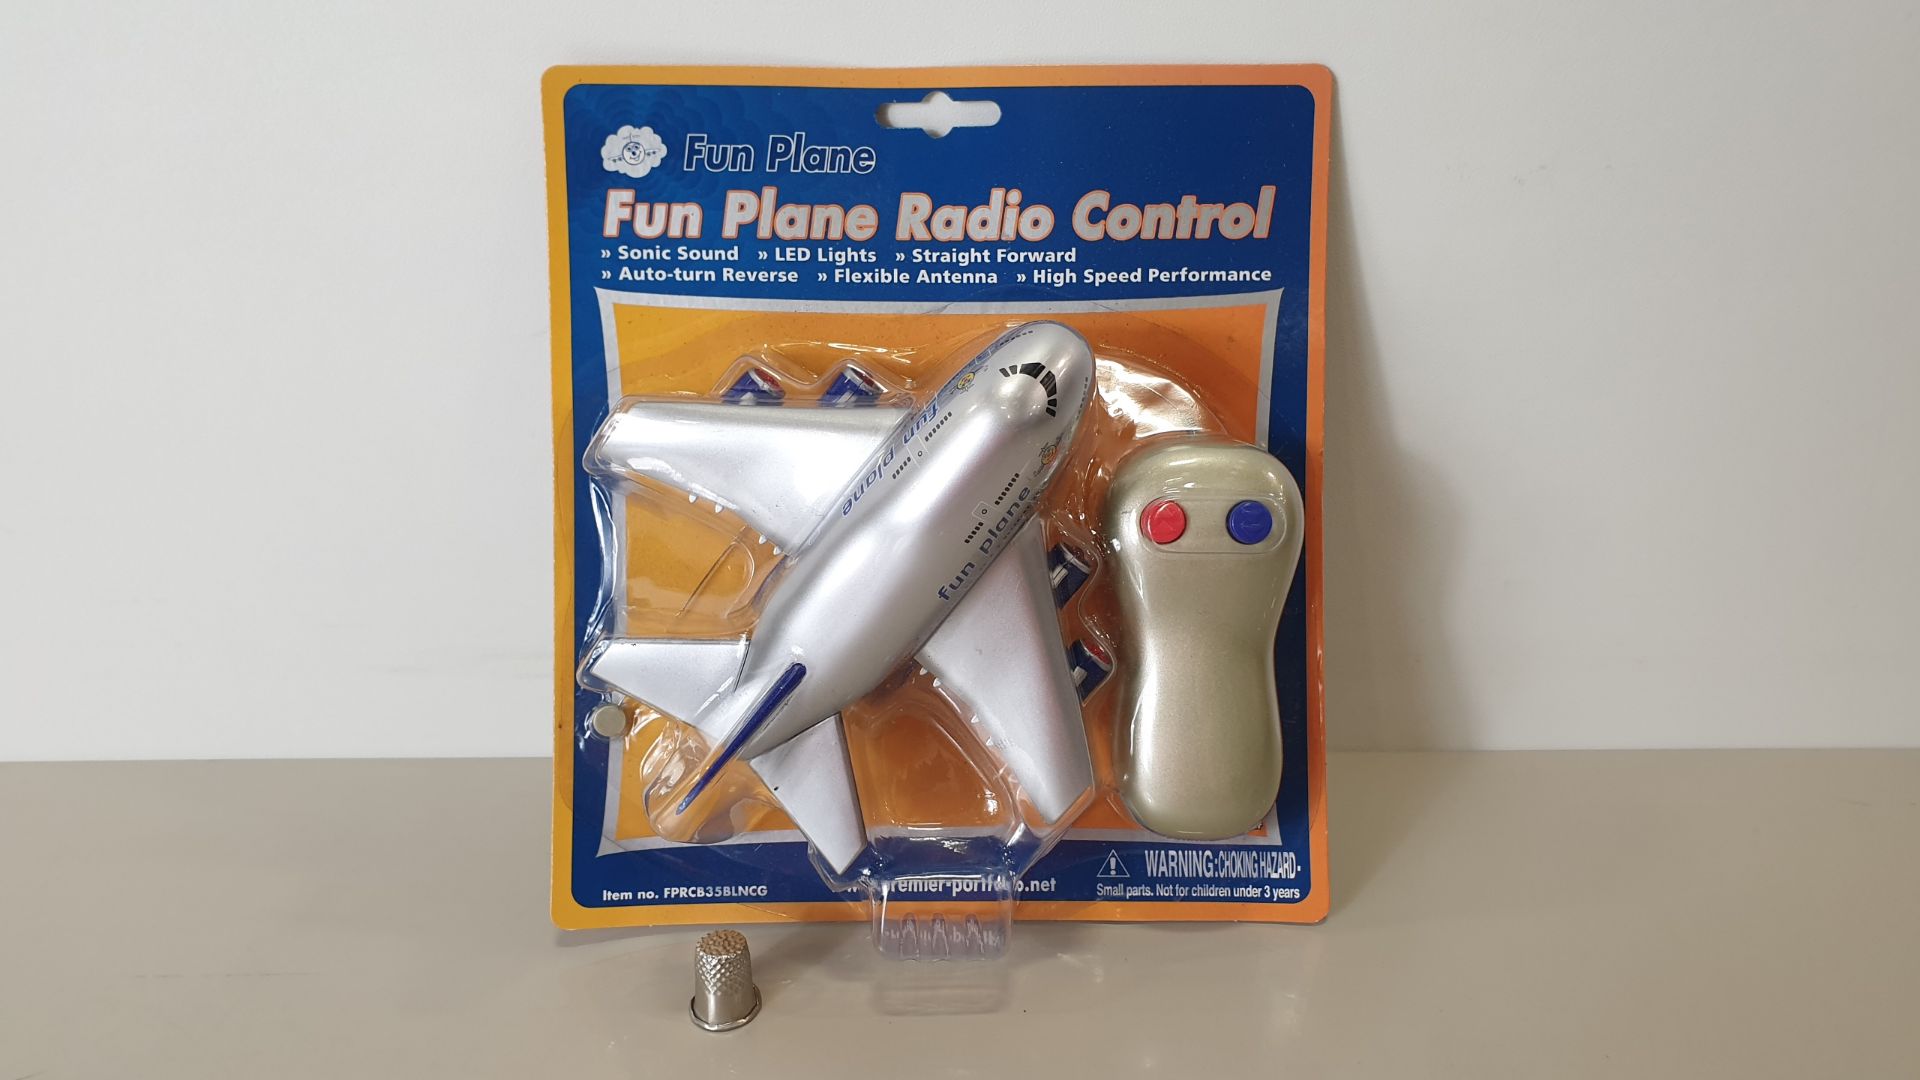 48 X RADIO CONTROLLED FUN PLANE WITH LIGHTS & AUTO TURN REVERSE (FPRCB35BLNCG) - ORIG RRP £22 EACH -